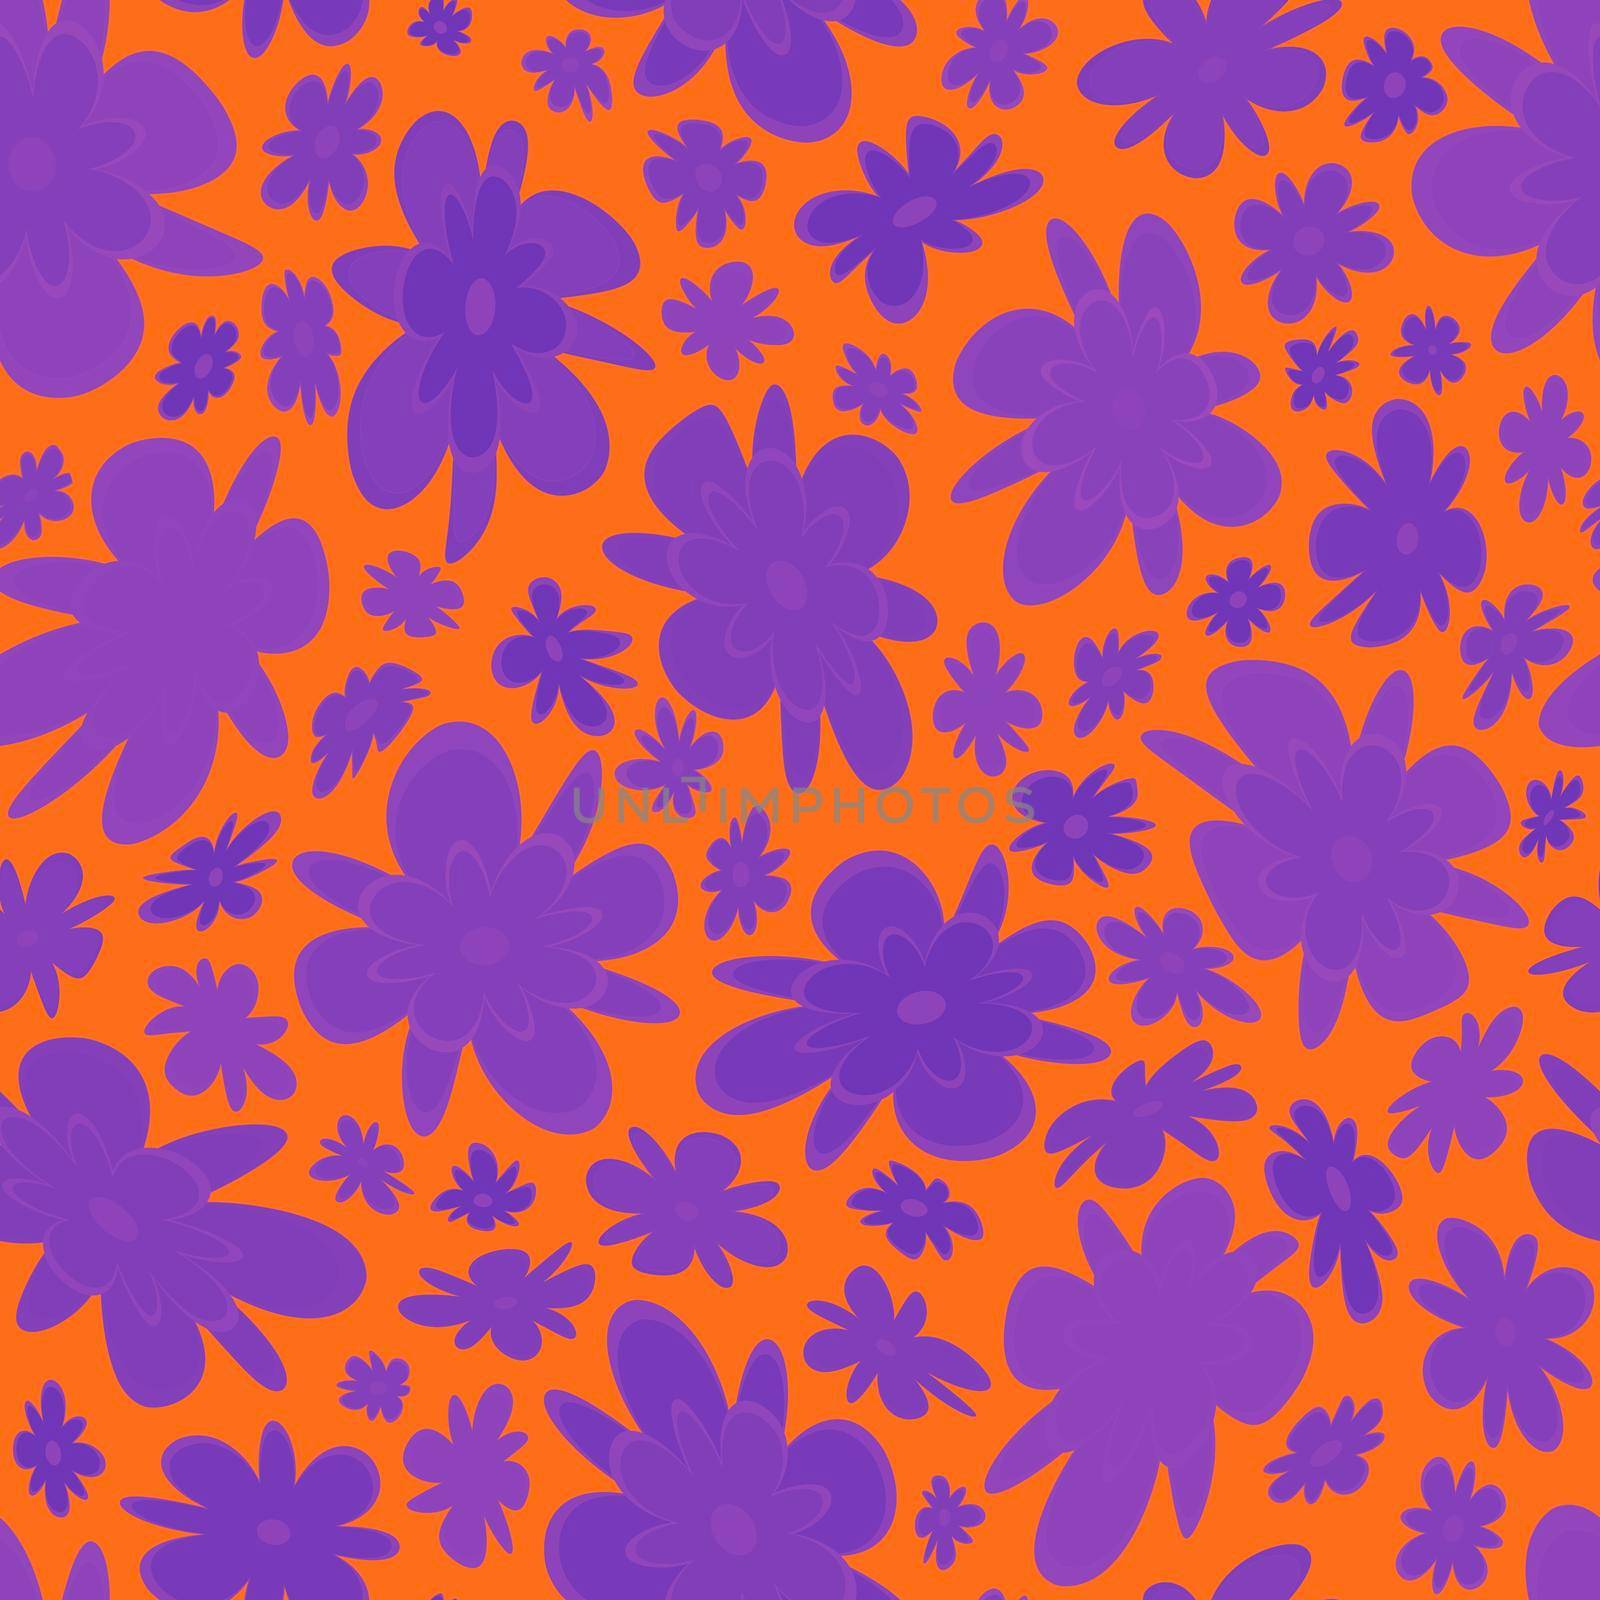 Trendy fabric pattern with miniature flowers.Summer print.Fashion design.Motifs scattered random.Elegant template for fashion prints.Good for fashion,textile,fabric,gift wrapping paper.Orange lilac by Angelsmoon